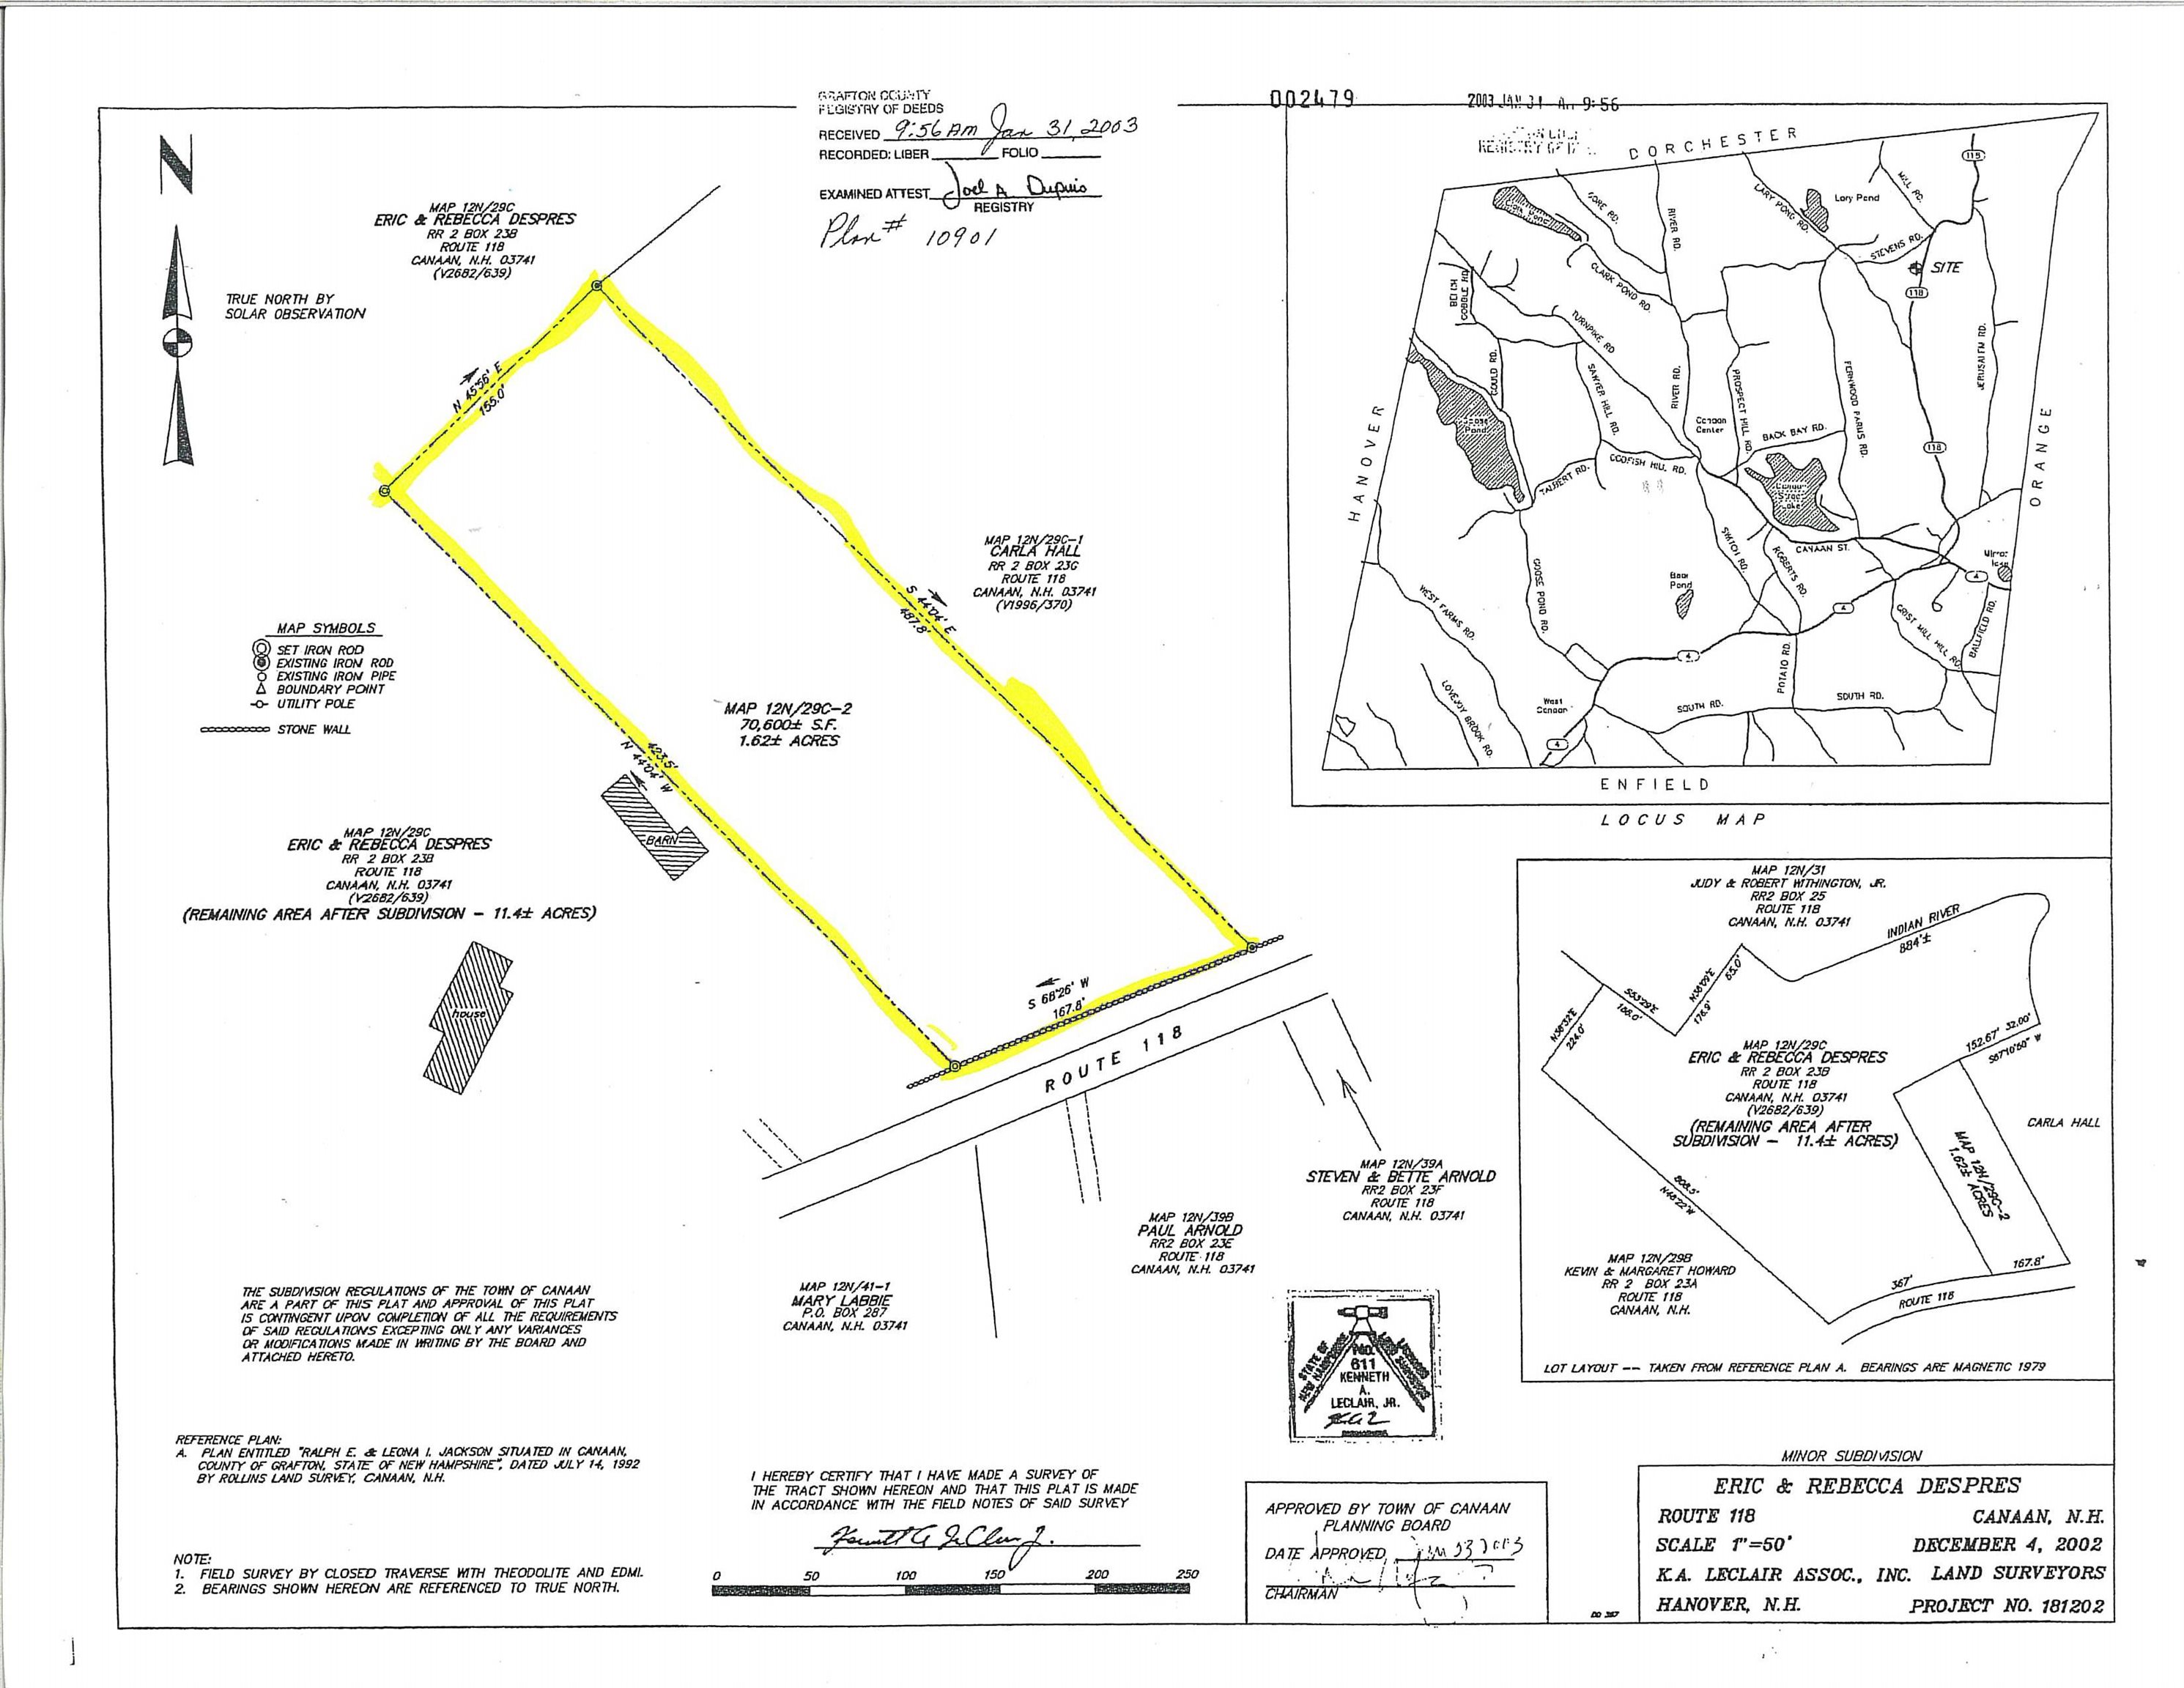 CANAAN NH Land / Acres for sale